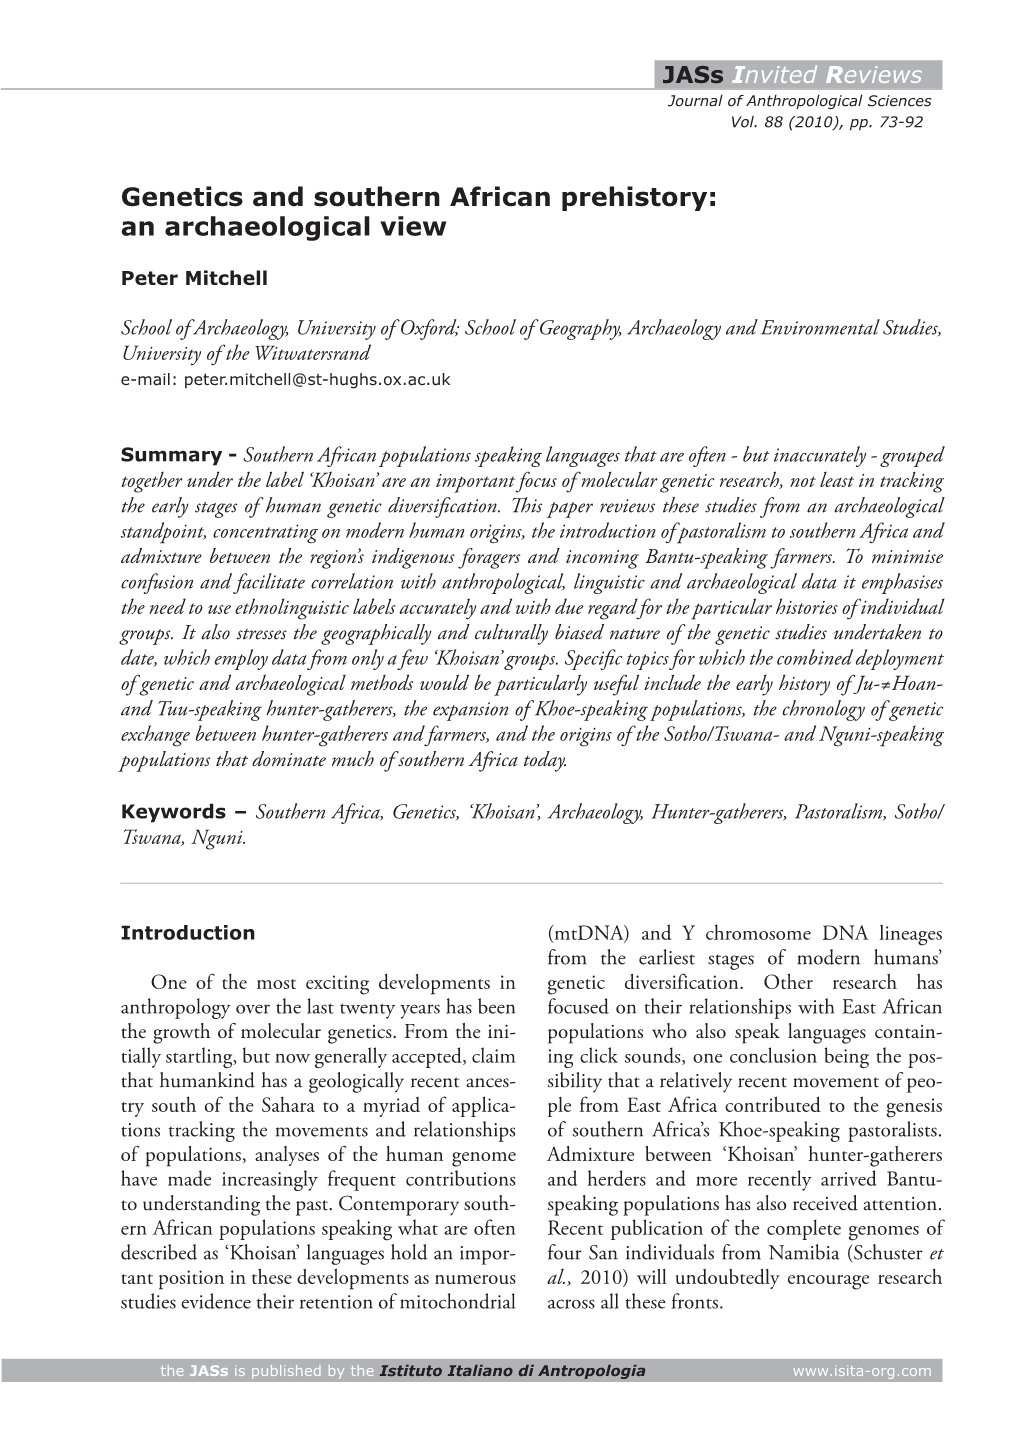 Genetics and Southern African Prehistory: an Archaeological View